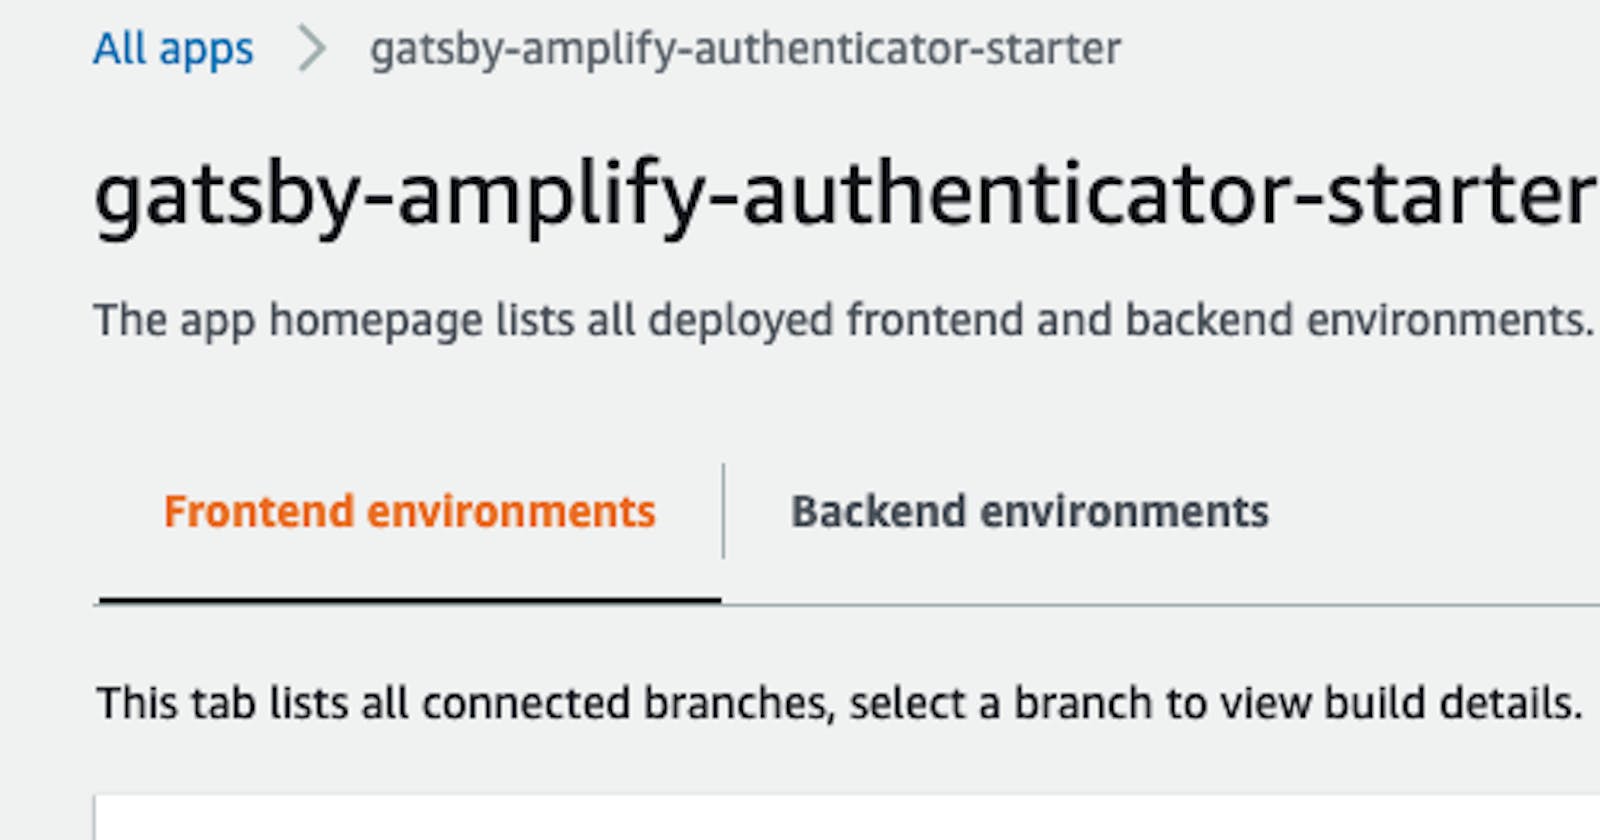 Using Amplify UI's Authenticator with Gatsby